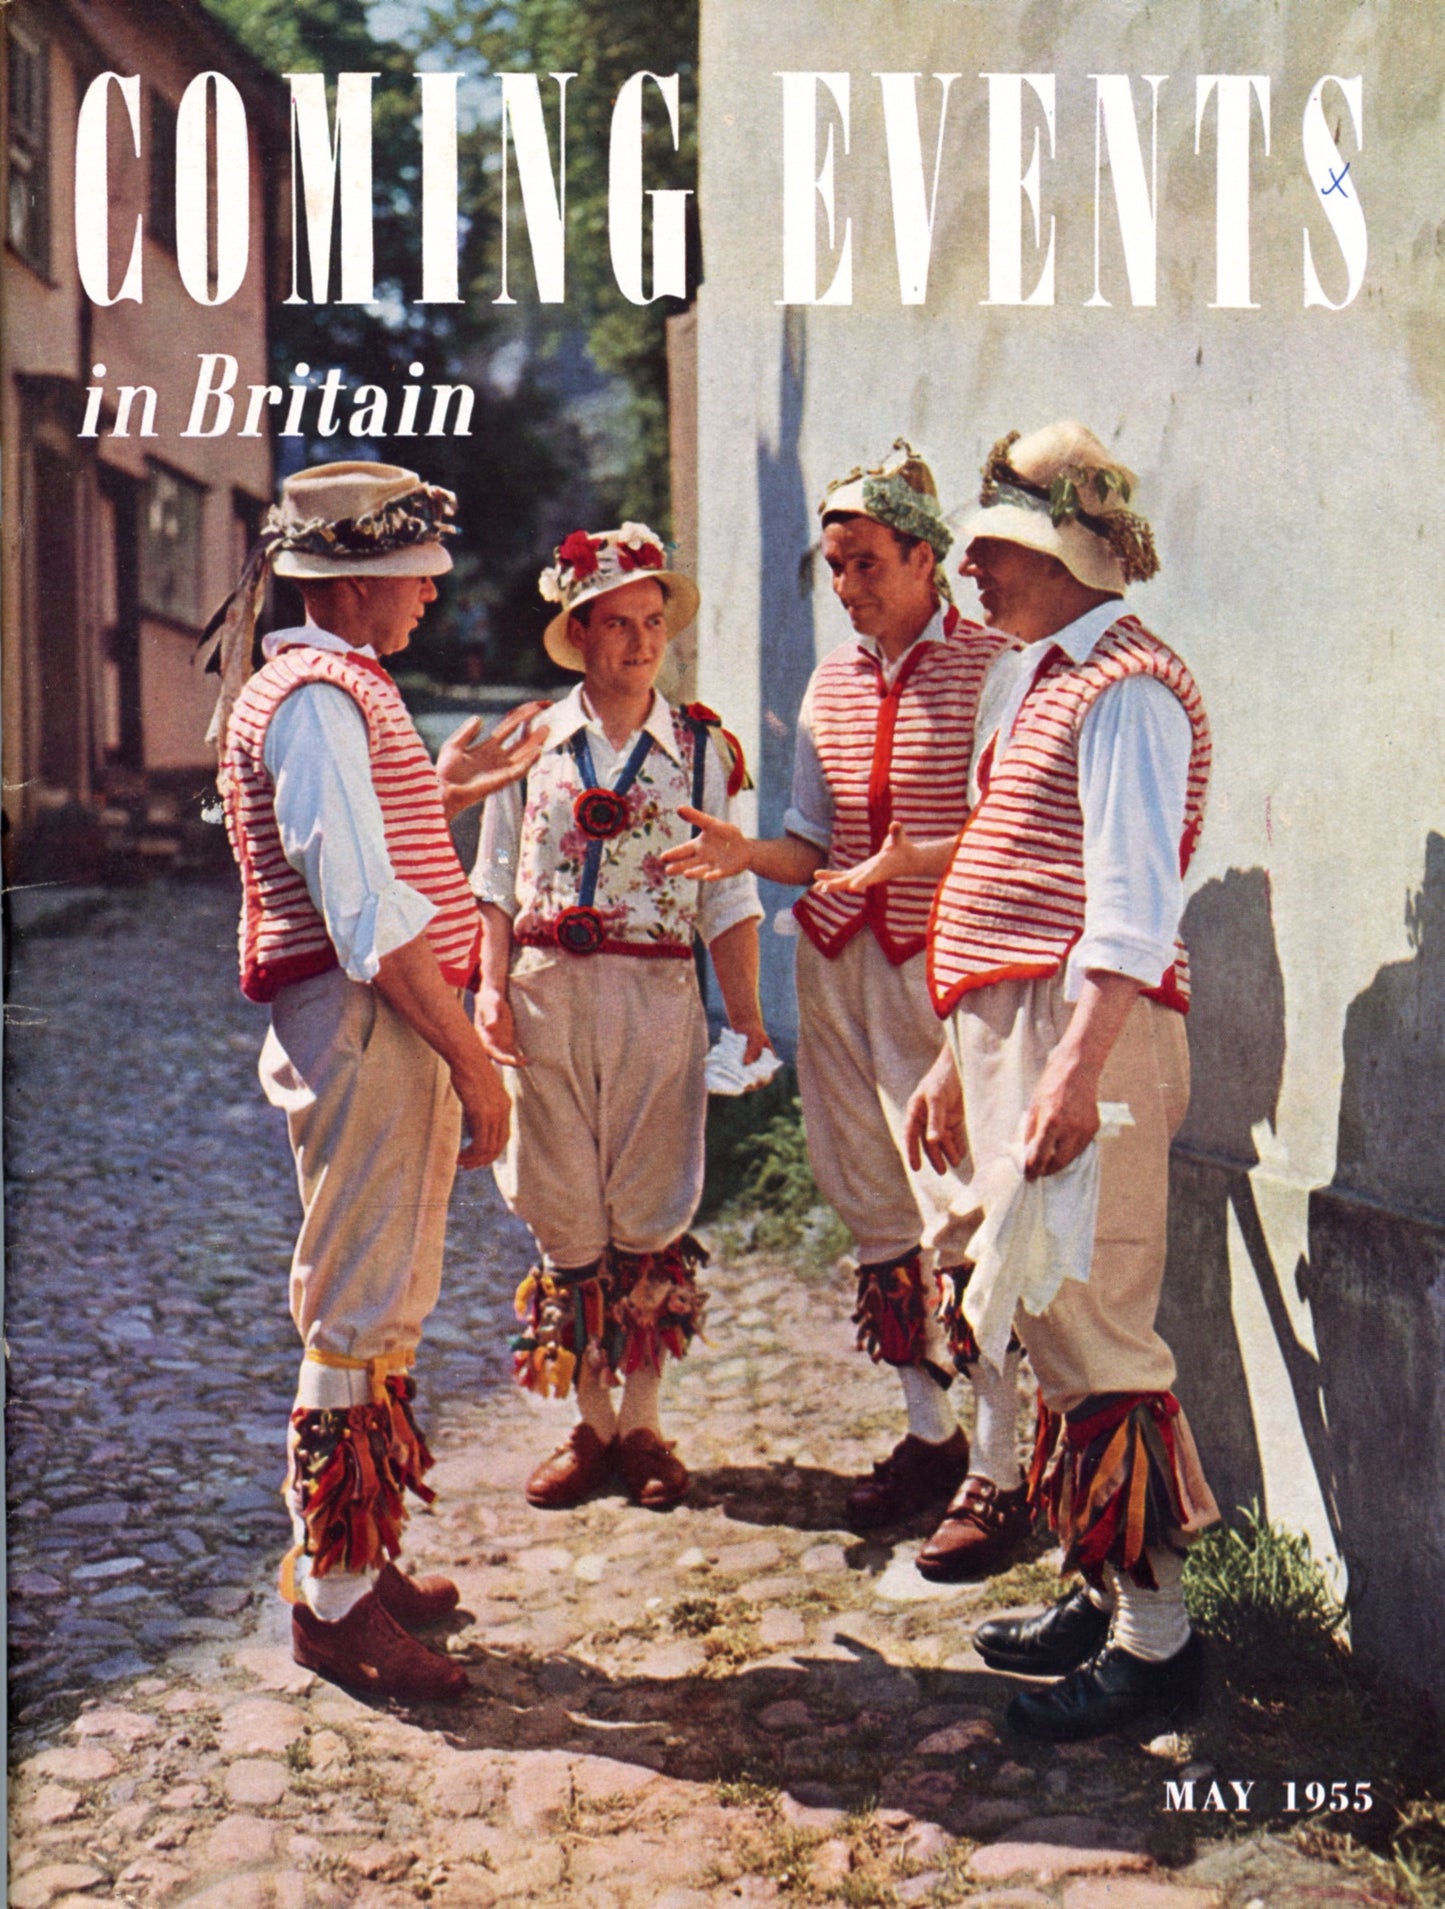 COMING EVENTS IN BRITAIN Vintage Travel Magazine © May 1955